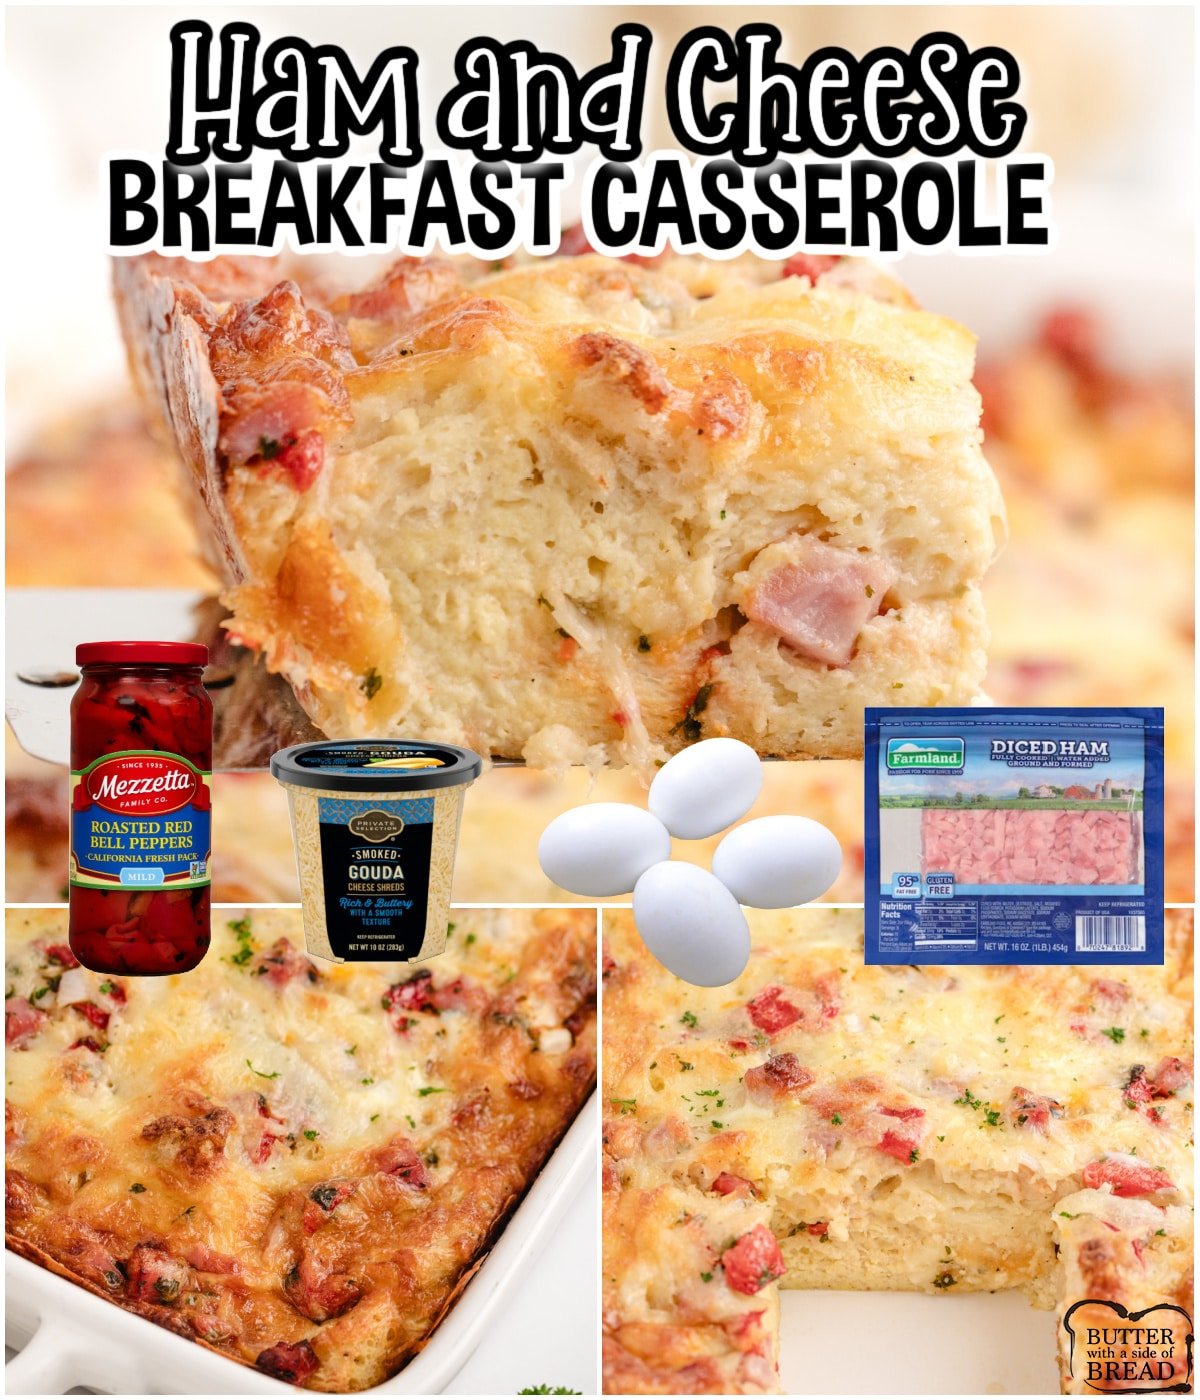 Our Ham and Cheese Breakfast Casserole is filling, easy to make and it can be made the night before! Perfect for Christmas morning!